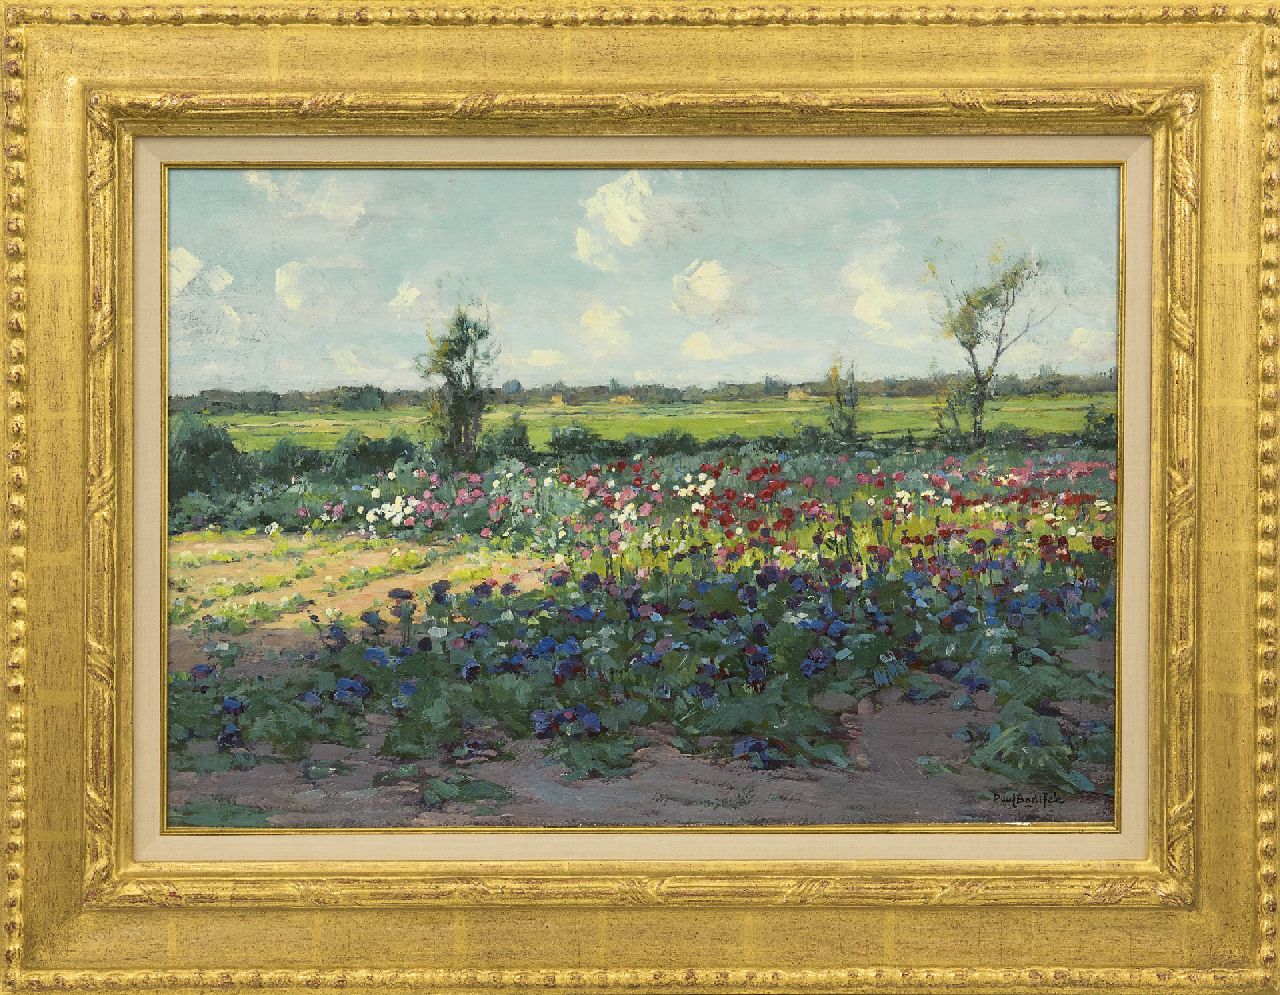 Bodifée J.P.P.  | Johannes Petrus Paulus 'Paul' Bodifée | Paintings offered for sale | Field of flowers, oil on paper laid down on board 35.3 x 50.4 cm, signed l.r.